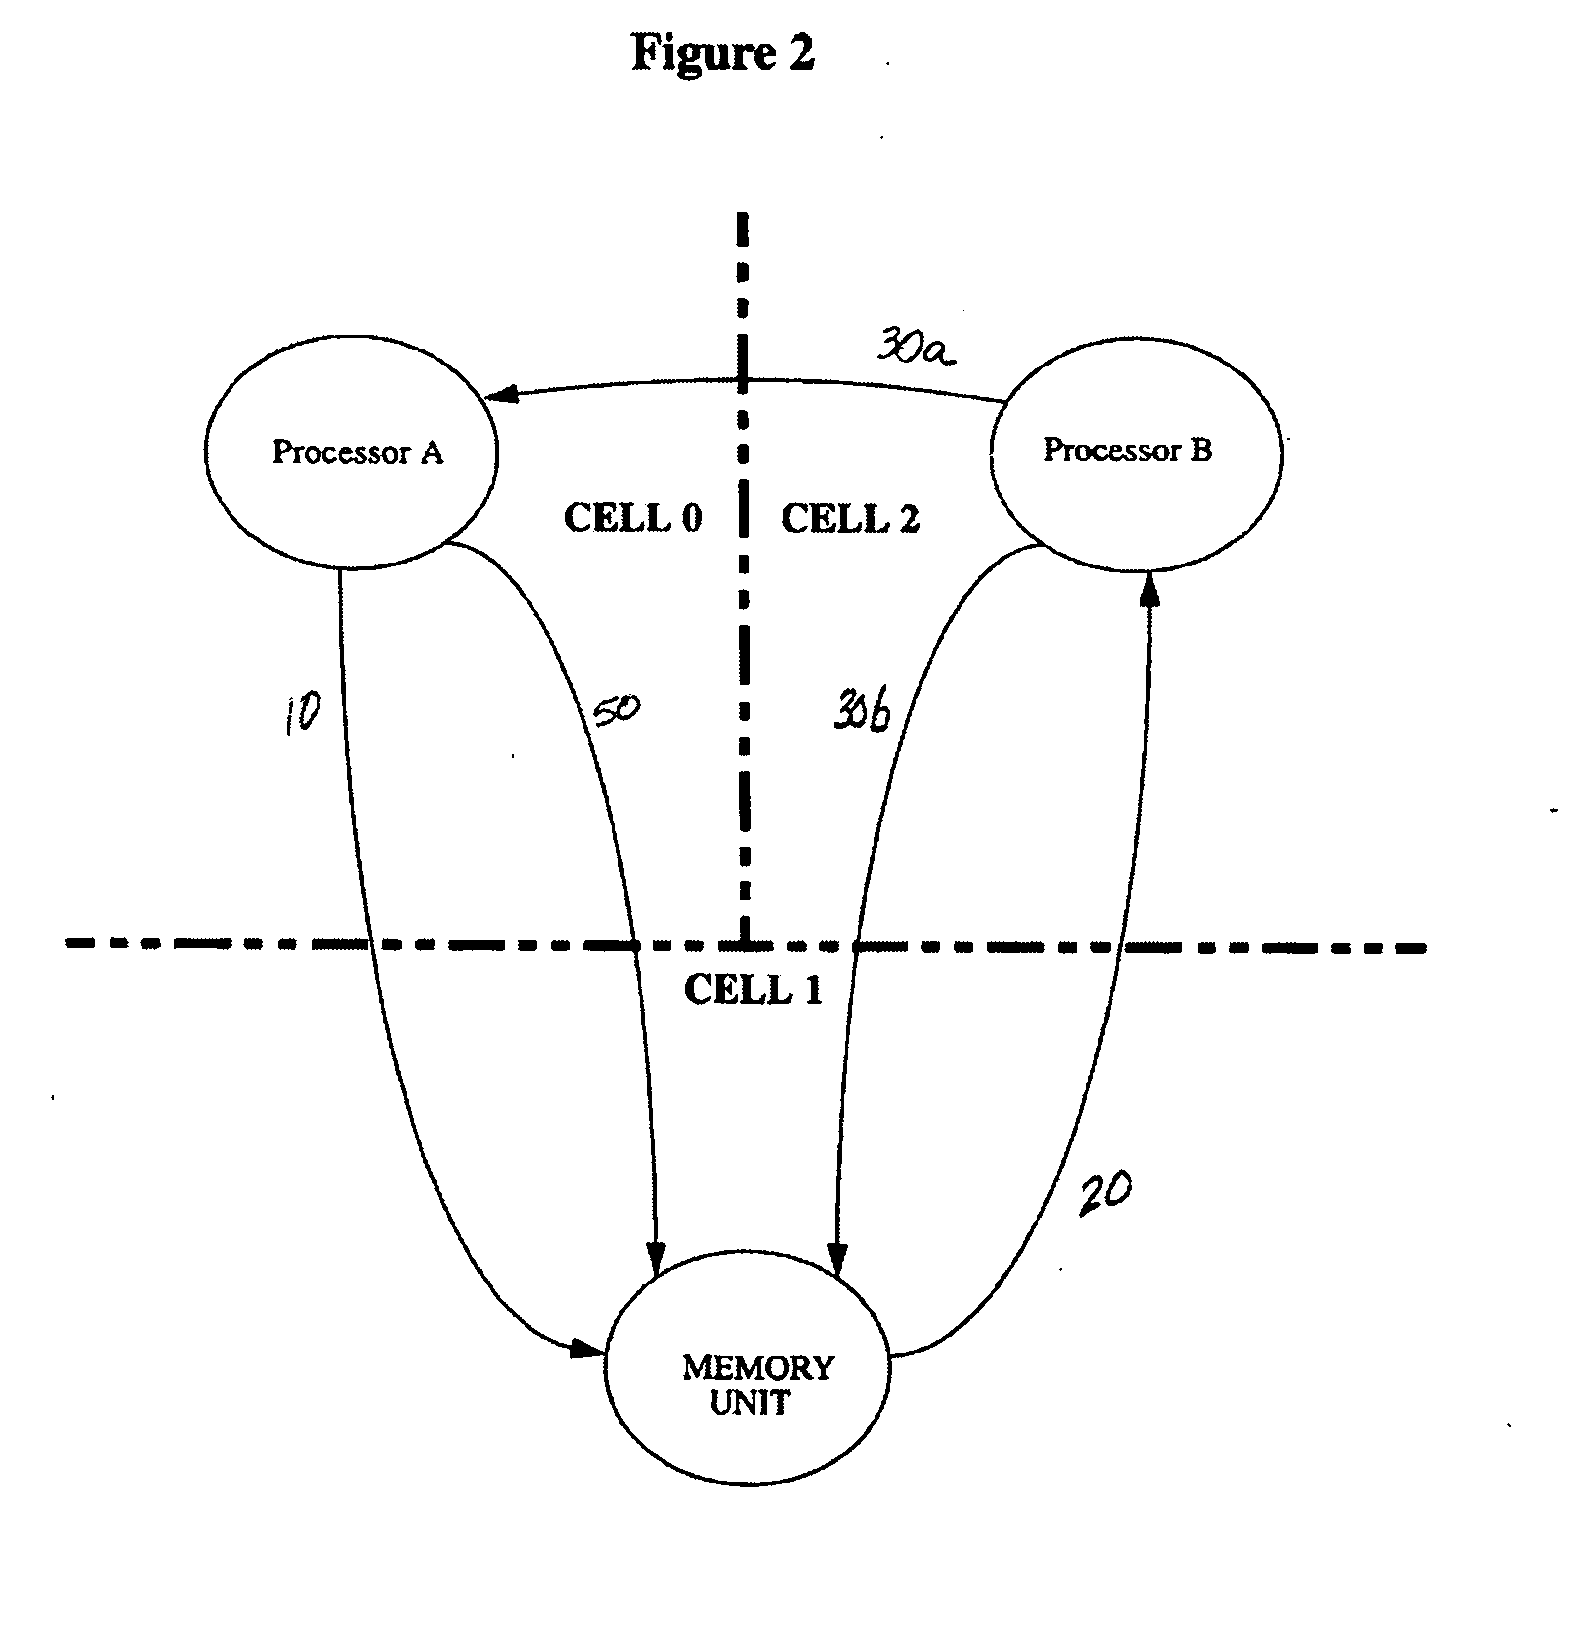 Cache line ownership transfer in multi-processor computer systems